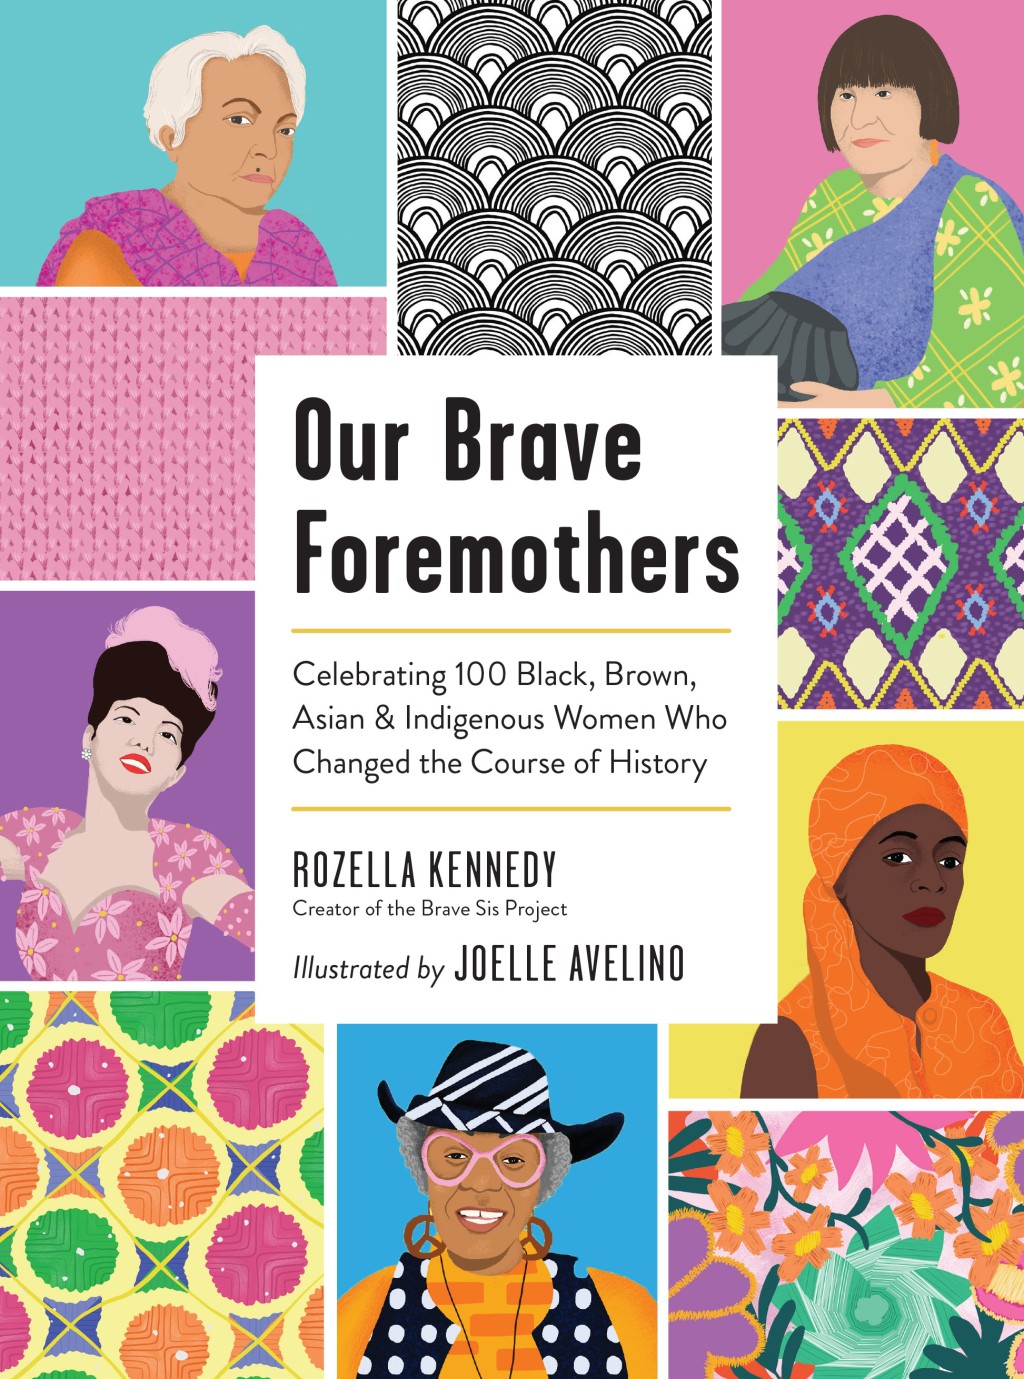 Rozella Kennedy Answers the Call to Write with her book, Our Brave Foremothers